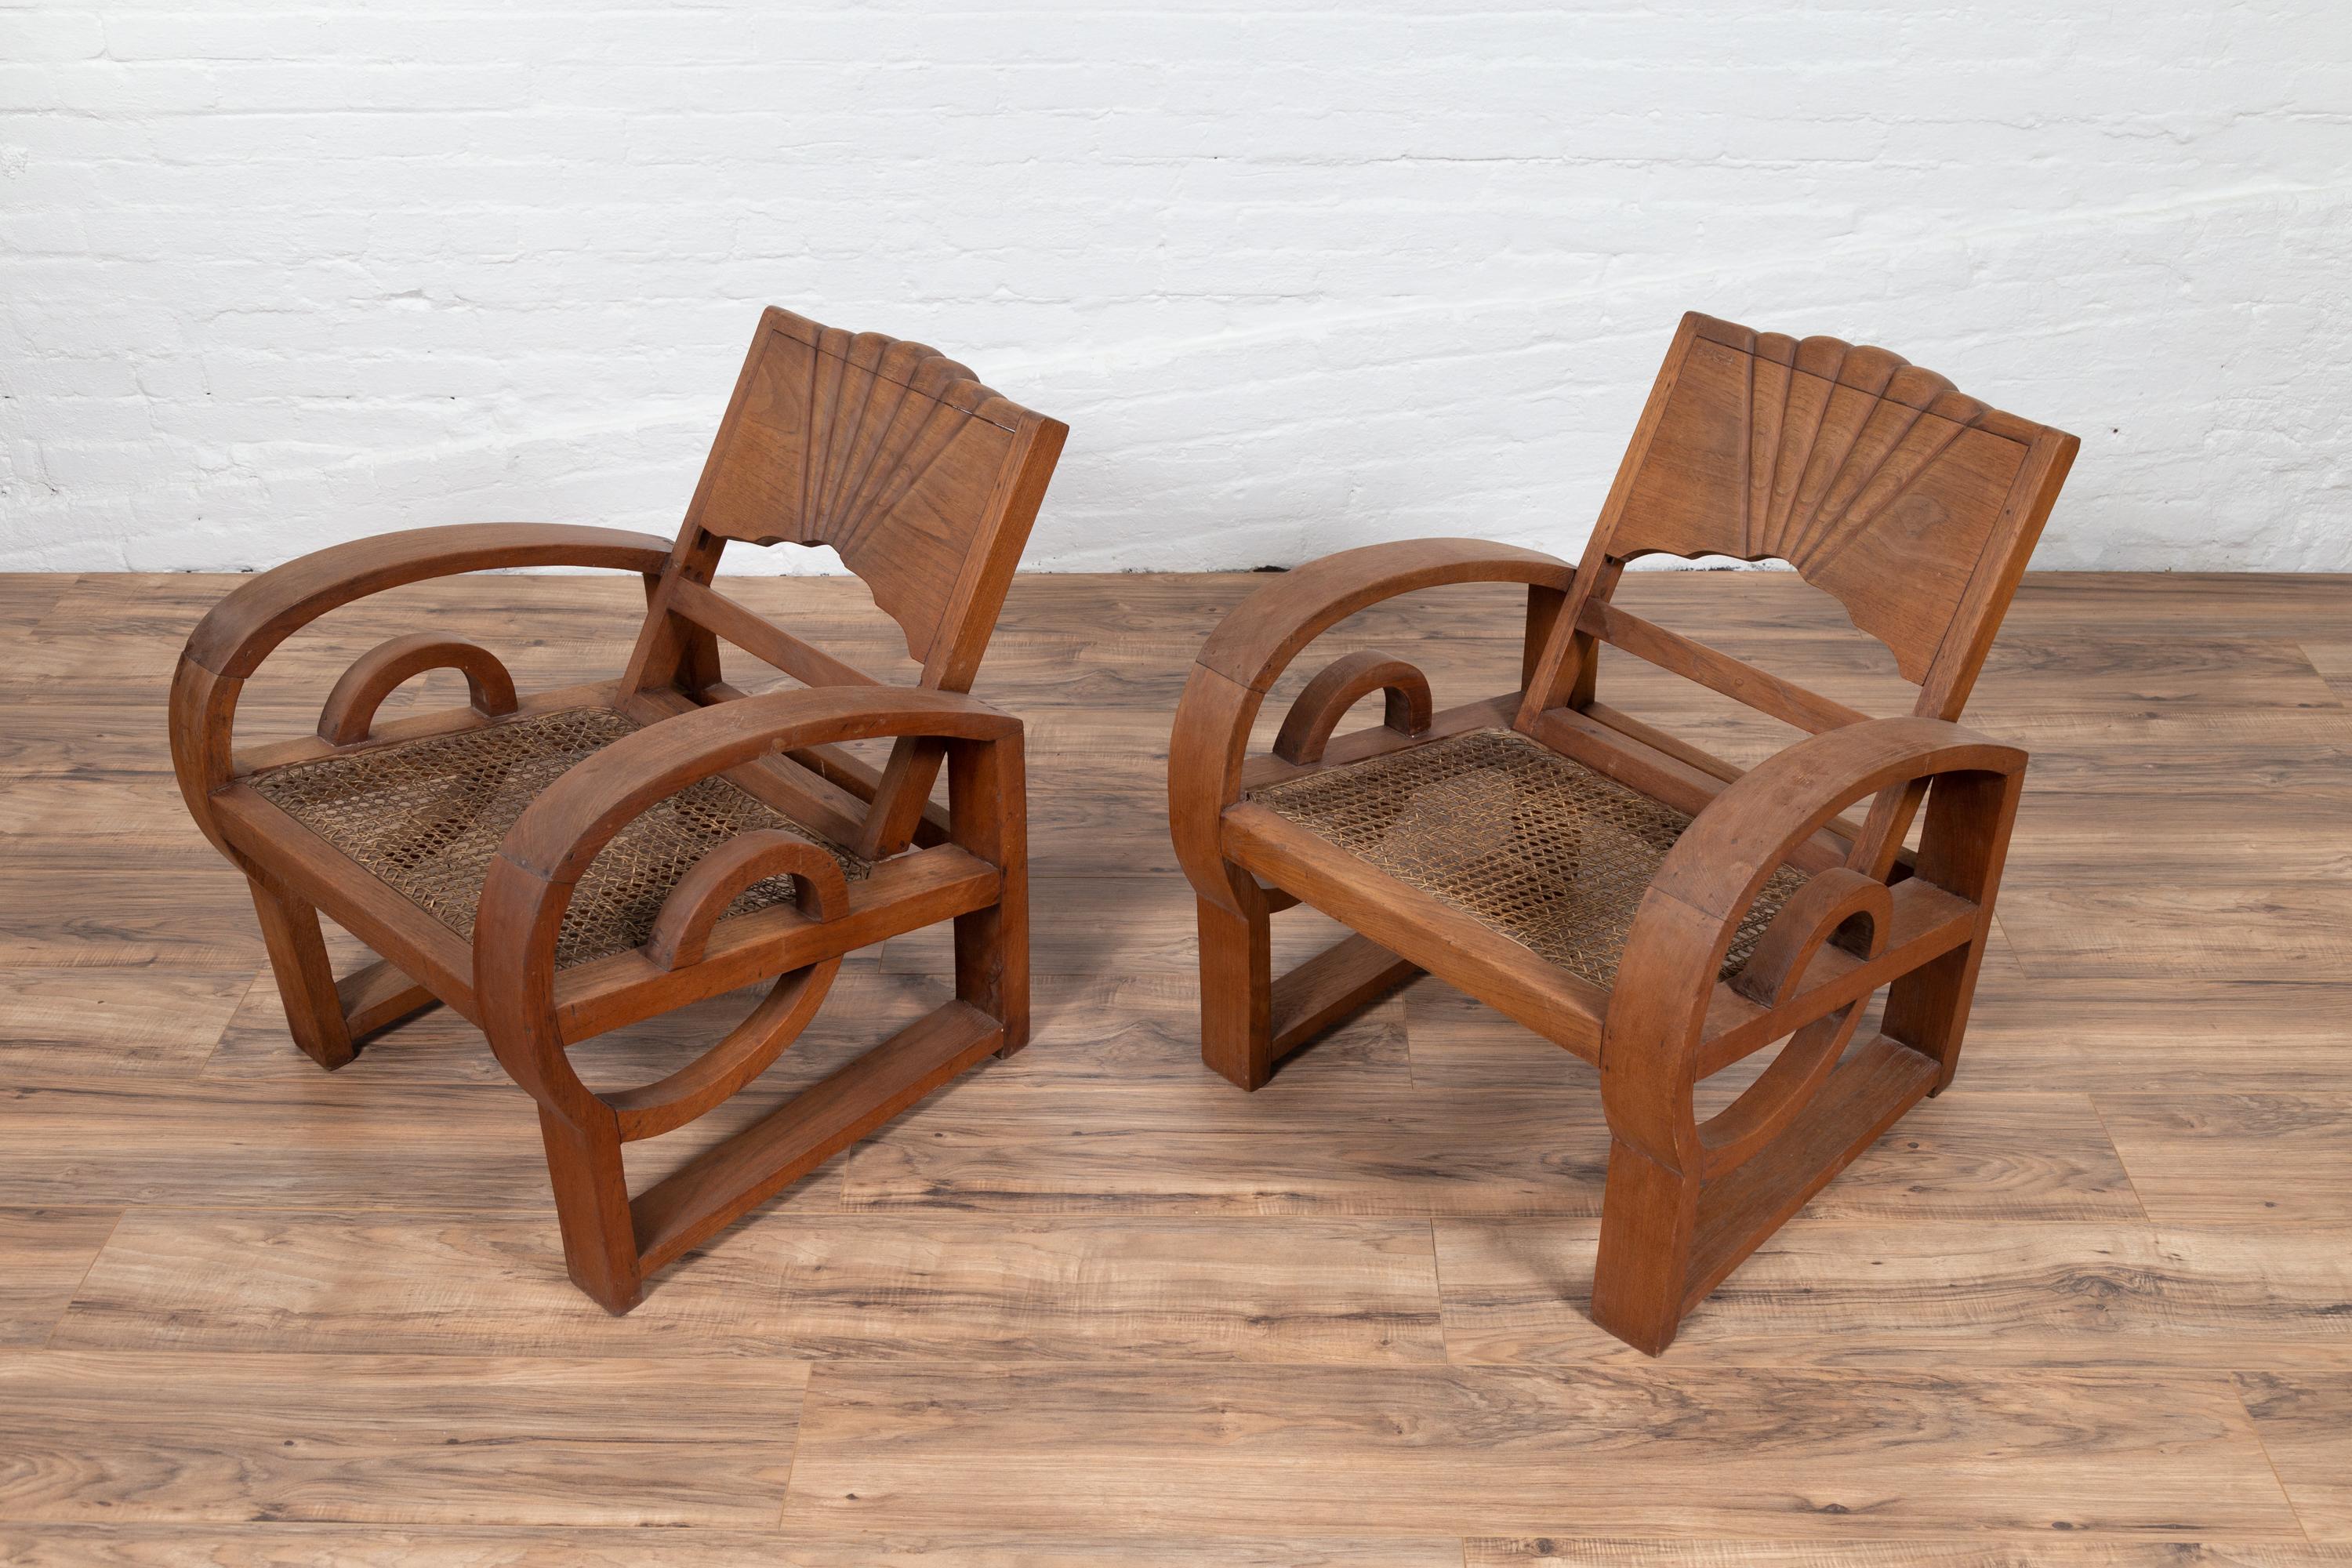 Pair of Teak Wood Country Chairs from Madura with Rattan Seats and Looping Arms 3